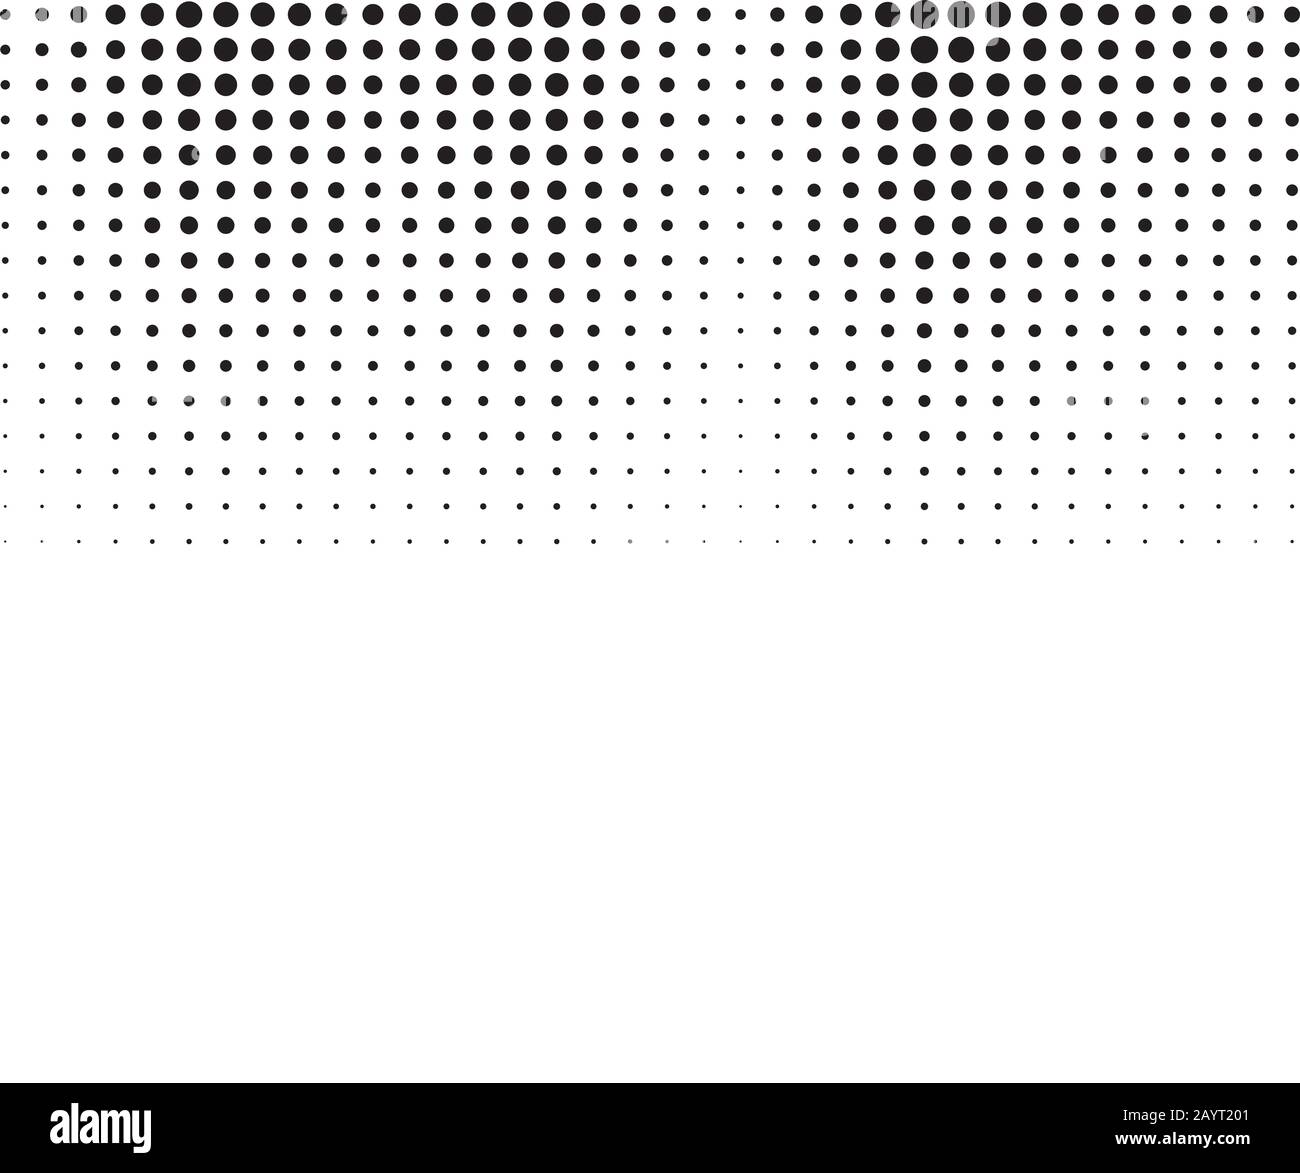 Halftone, transition, monochrome, dotted pattern. Vector illustration. Stock Vector